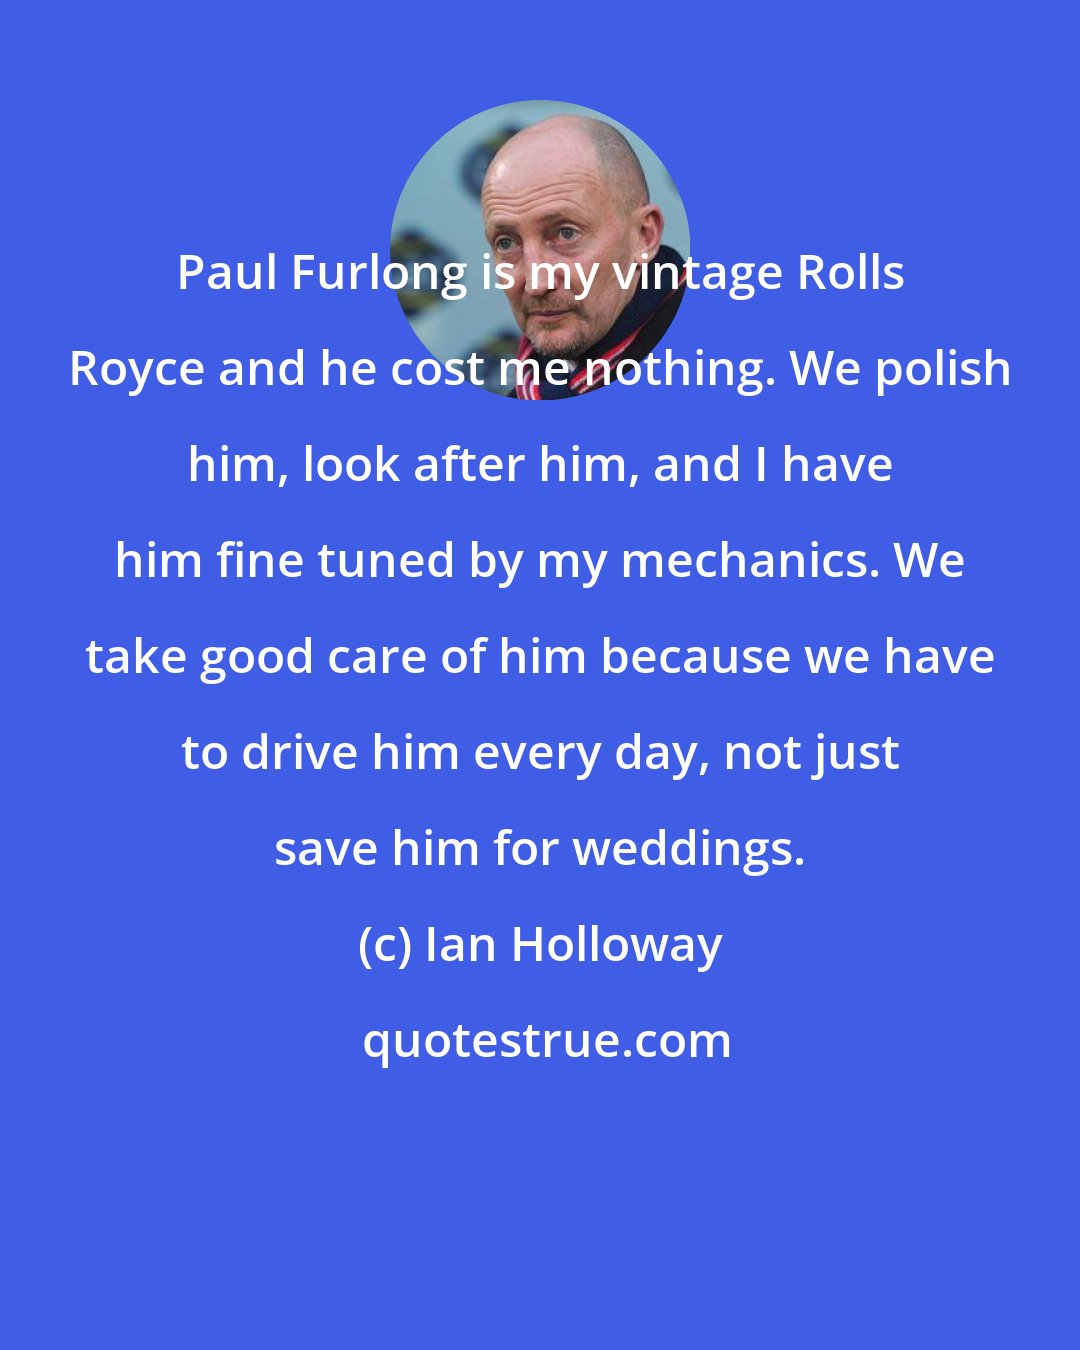 Ian Holloway: Paul Furlong is my vintage Rolls Royce and he cost me nothing. We polish him, look after him, and I have him fine tuned by my mechanics. We take good care of him because we have to drive him every day, not just save him for weddings.